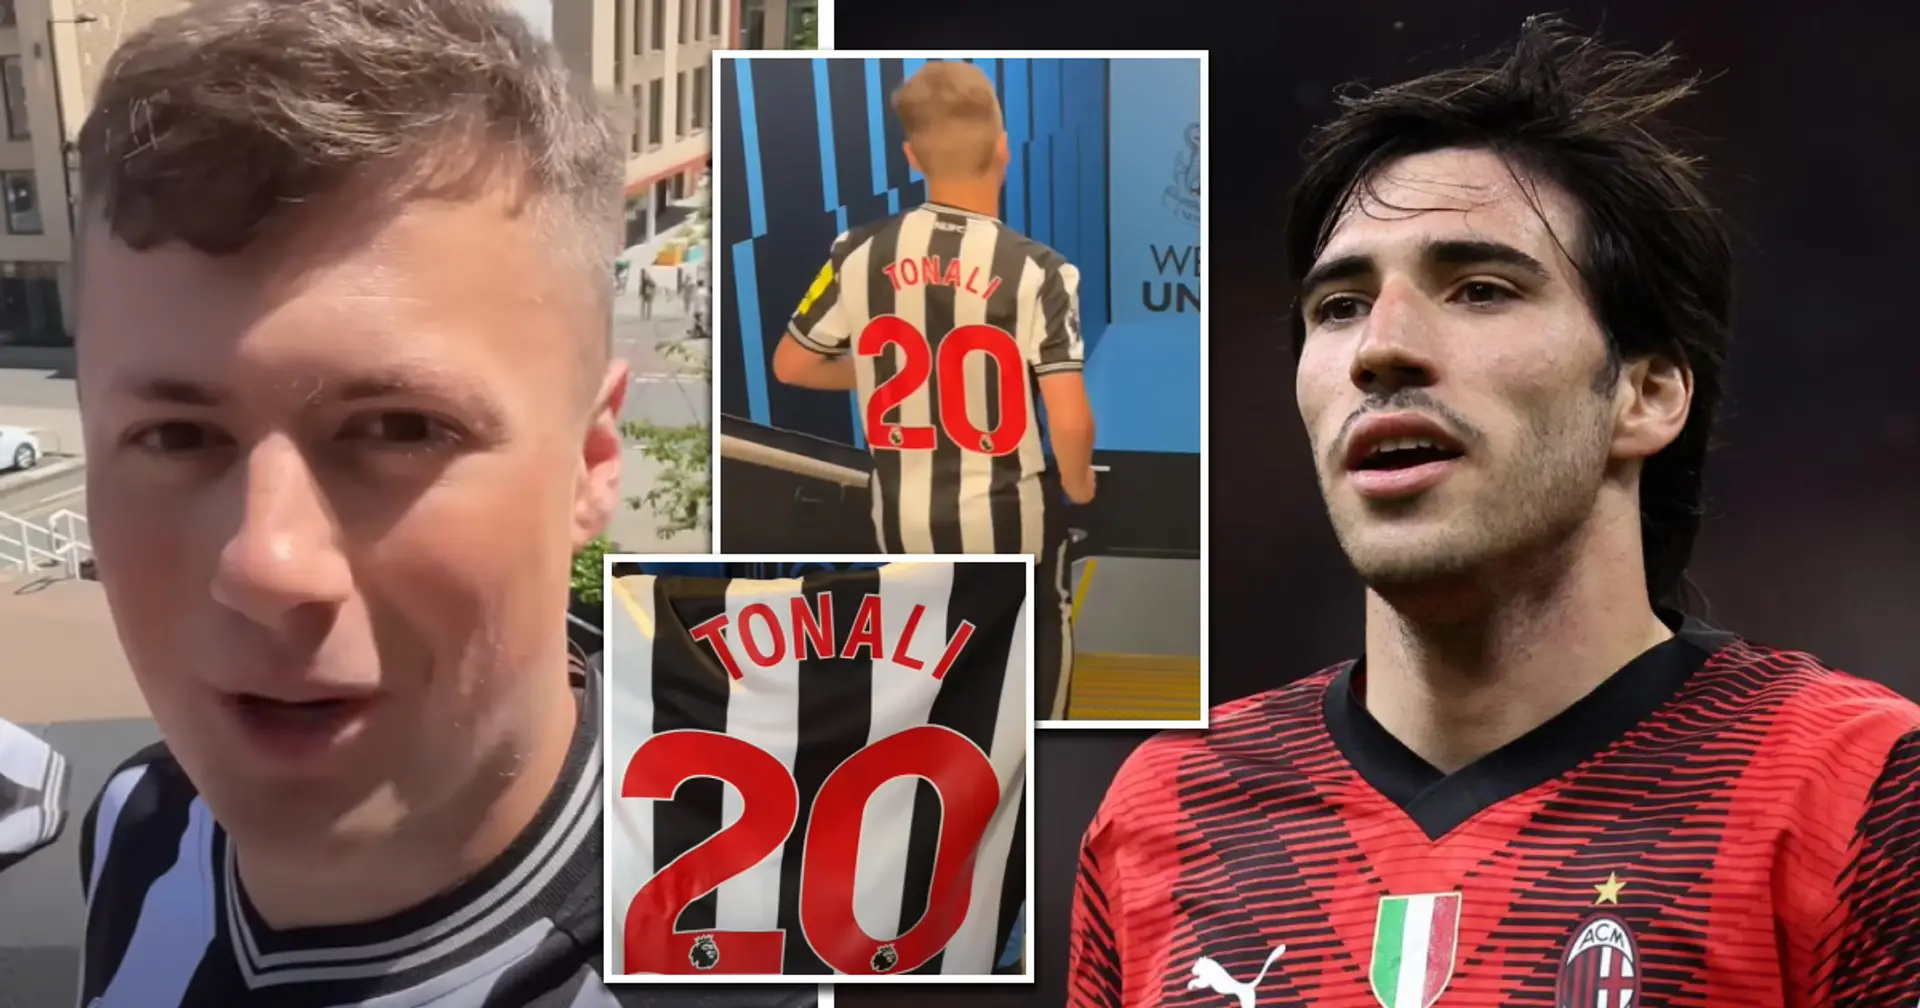 Bold Newcastle fan is so confident Tonali will get No.20 he’s already bought a shirt from the club shop